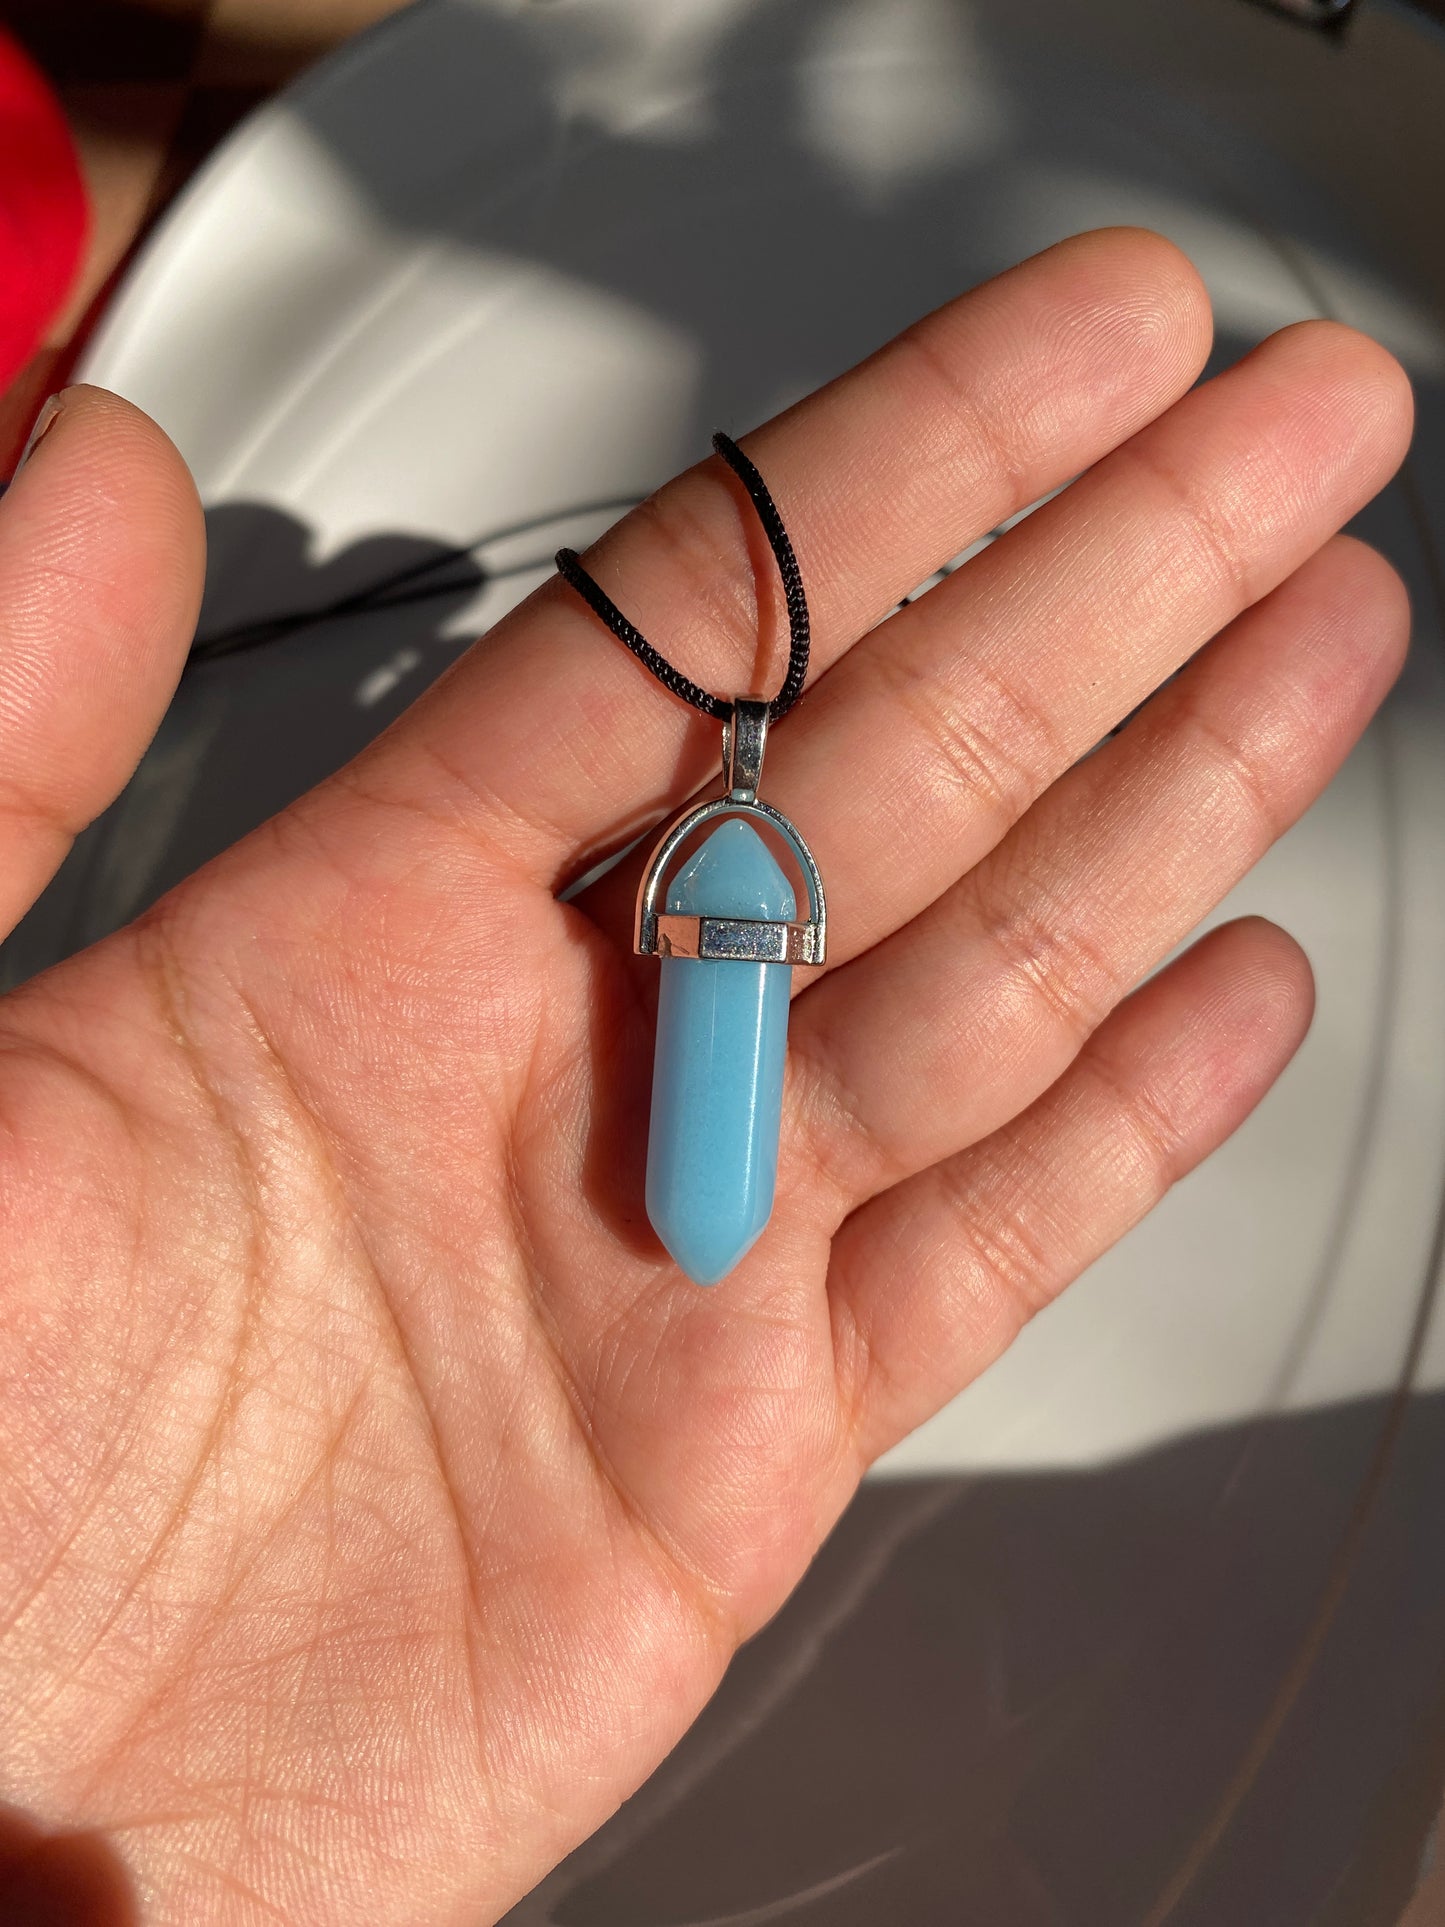 UNISEX PENCIL CRYSTAL PENDENT WITH THREAD